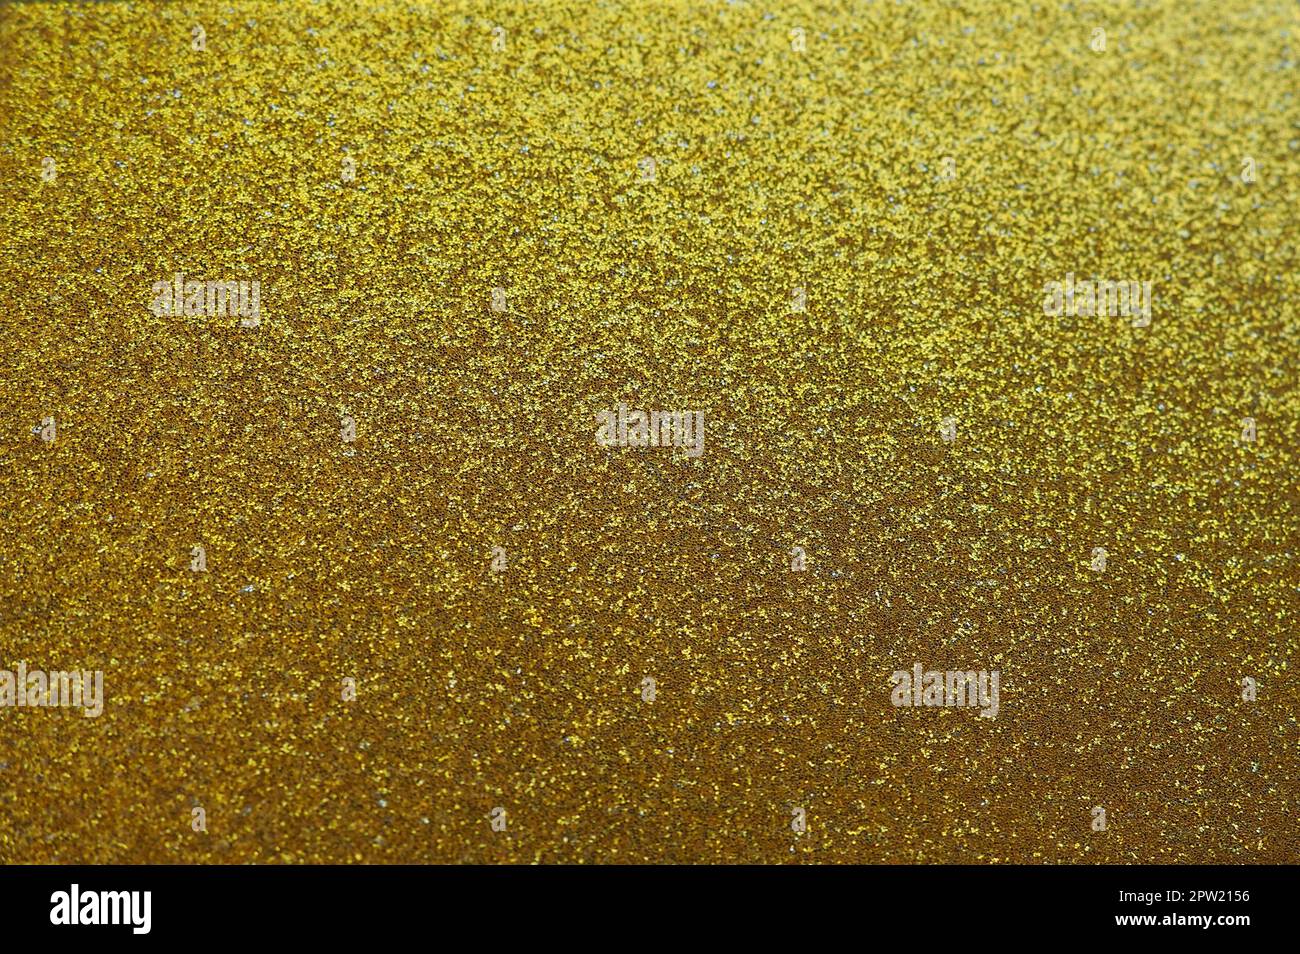 Gold Glitter Wrapping Paper